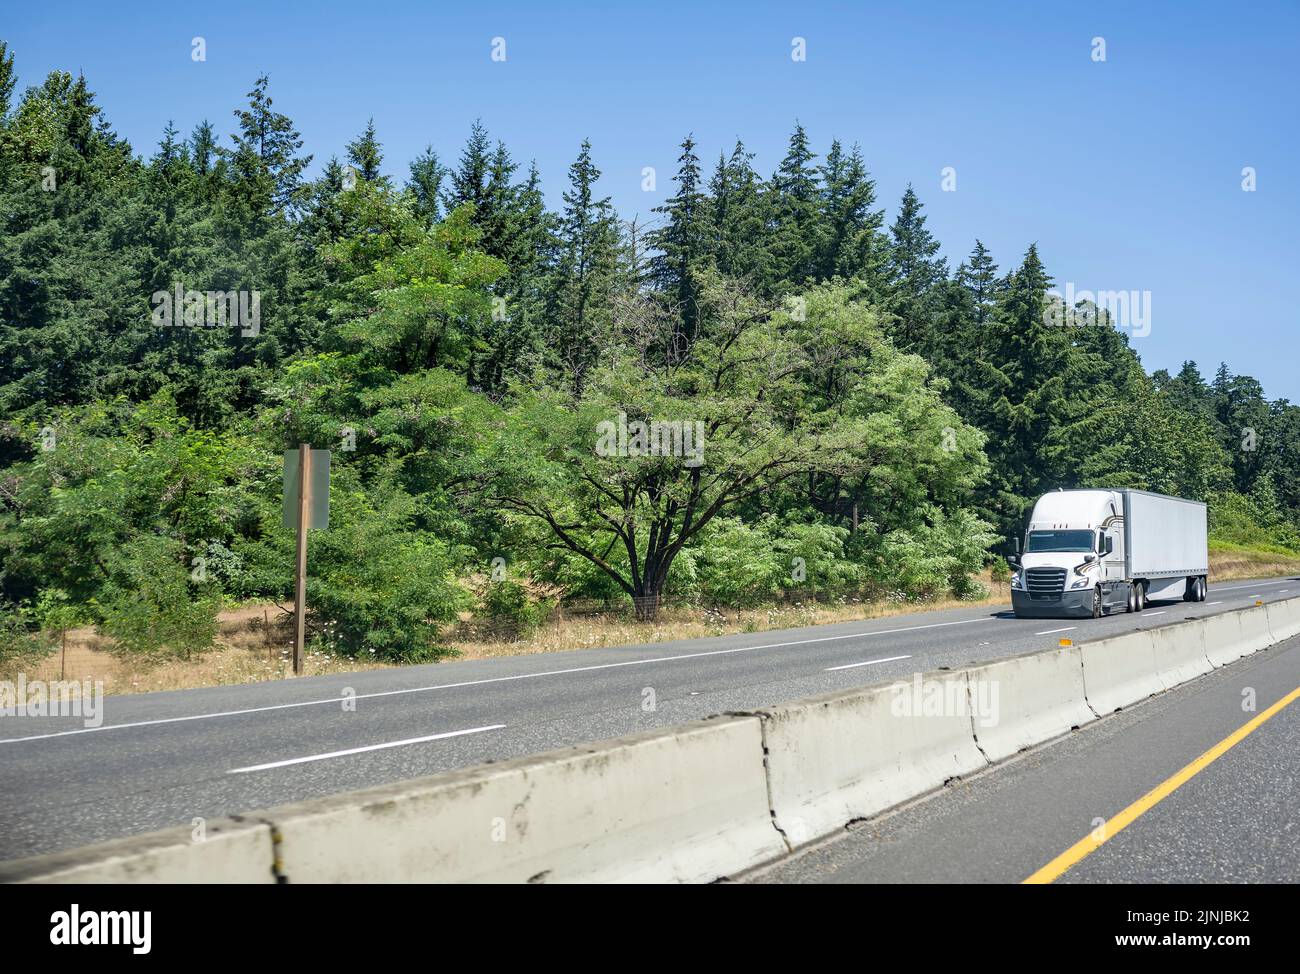 Industrial grade white big rig semi truck tractor with high roof and sleeping compartment transporting commercial cargo in dry van semi trailer runnin Stock Photo